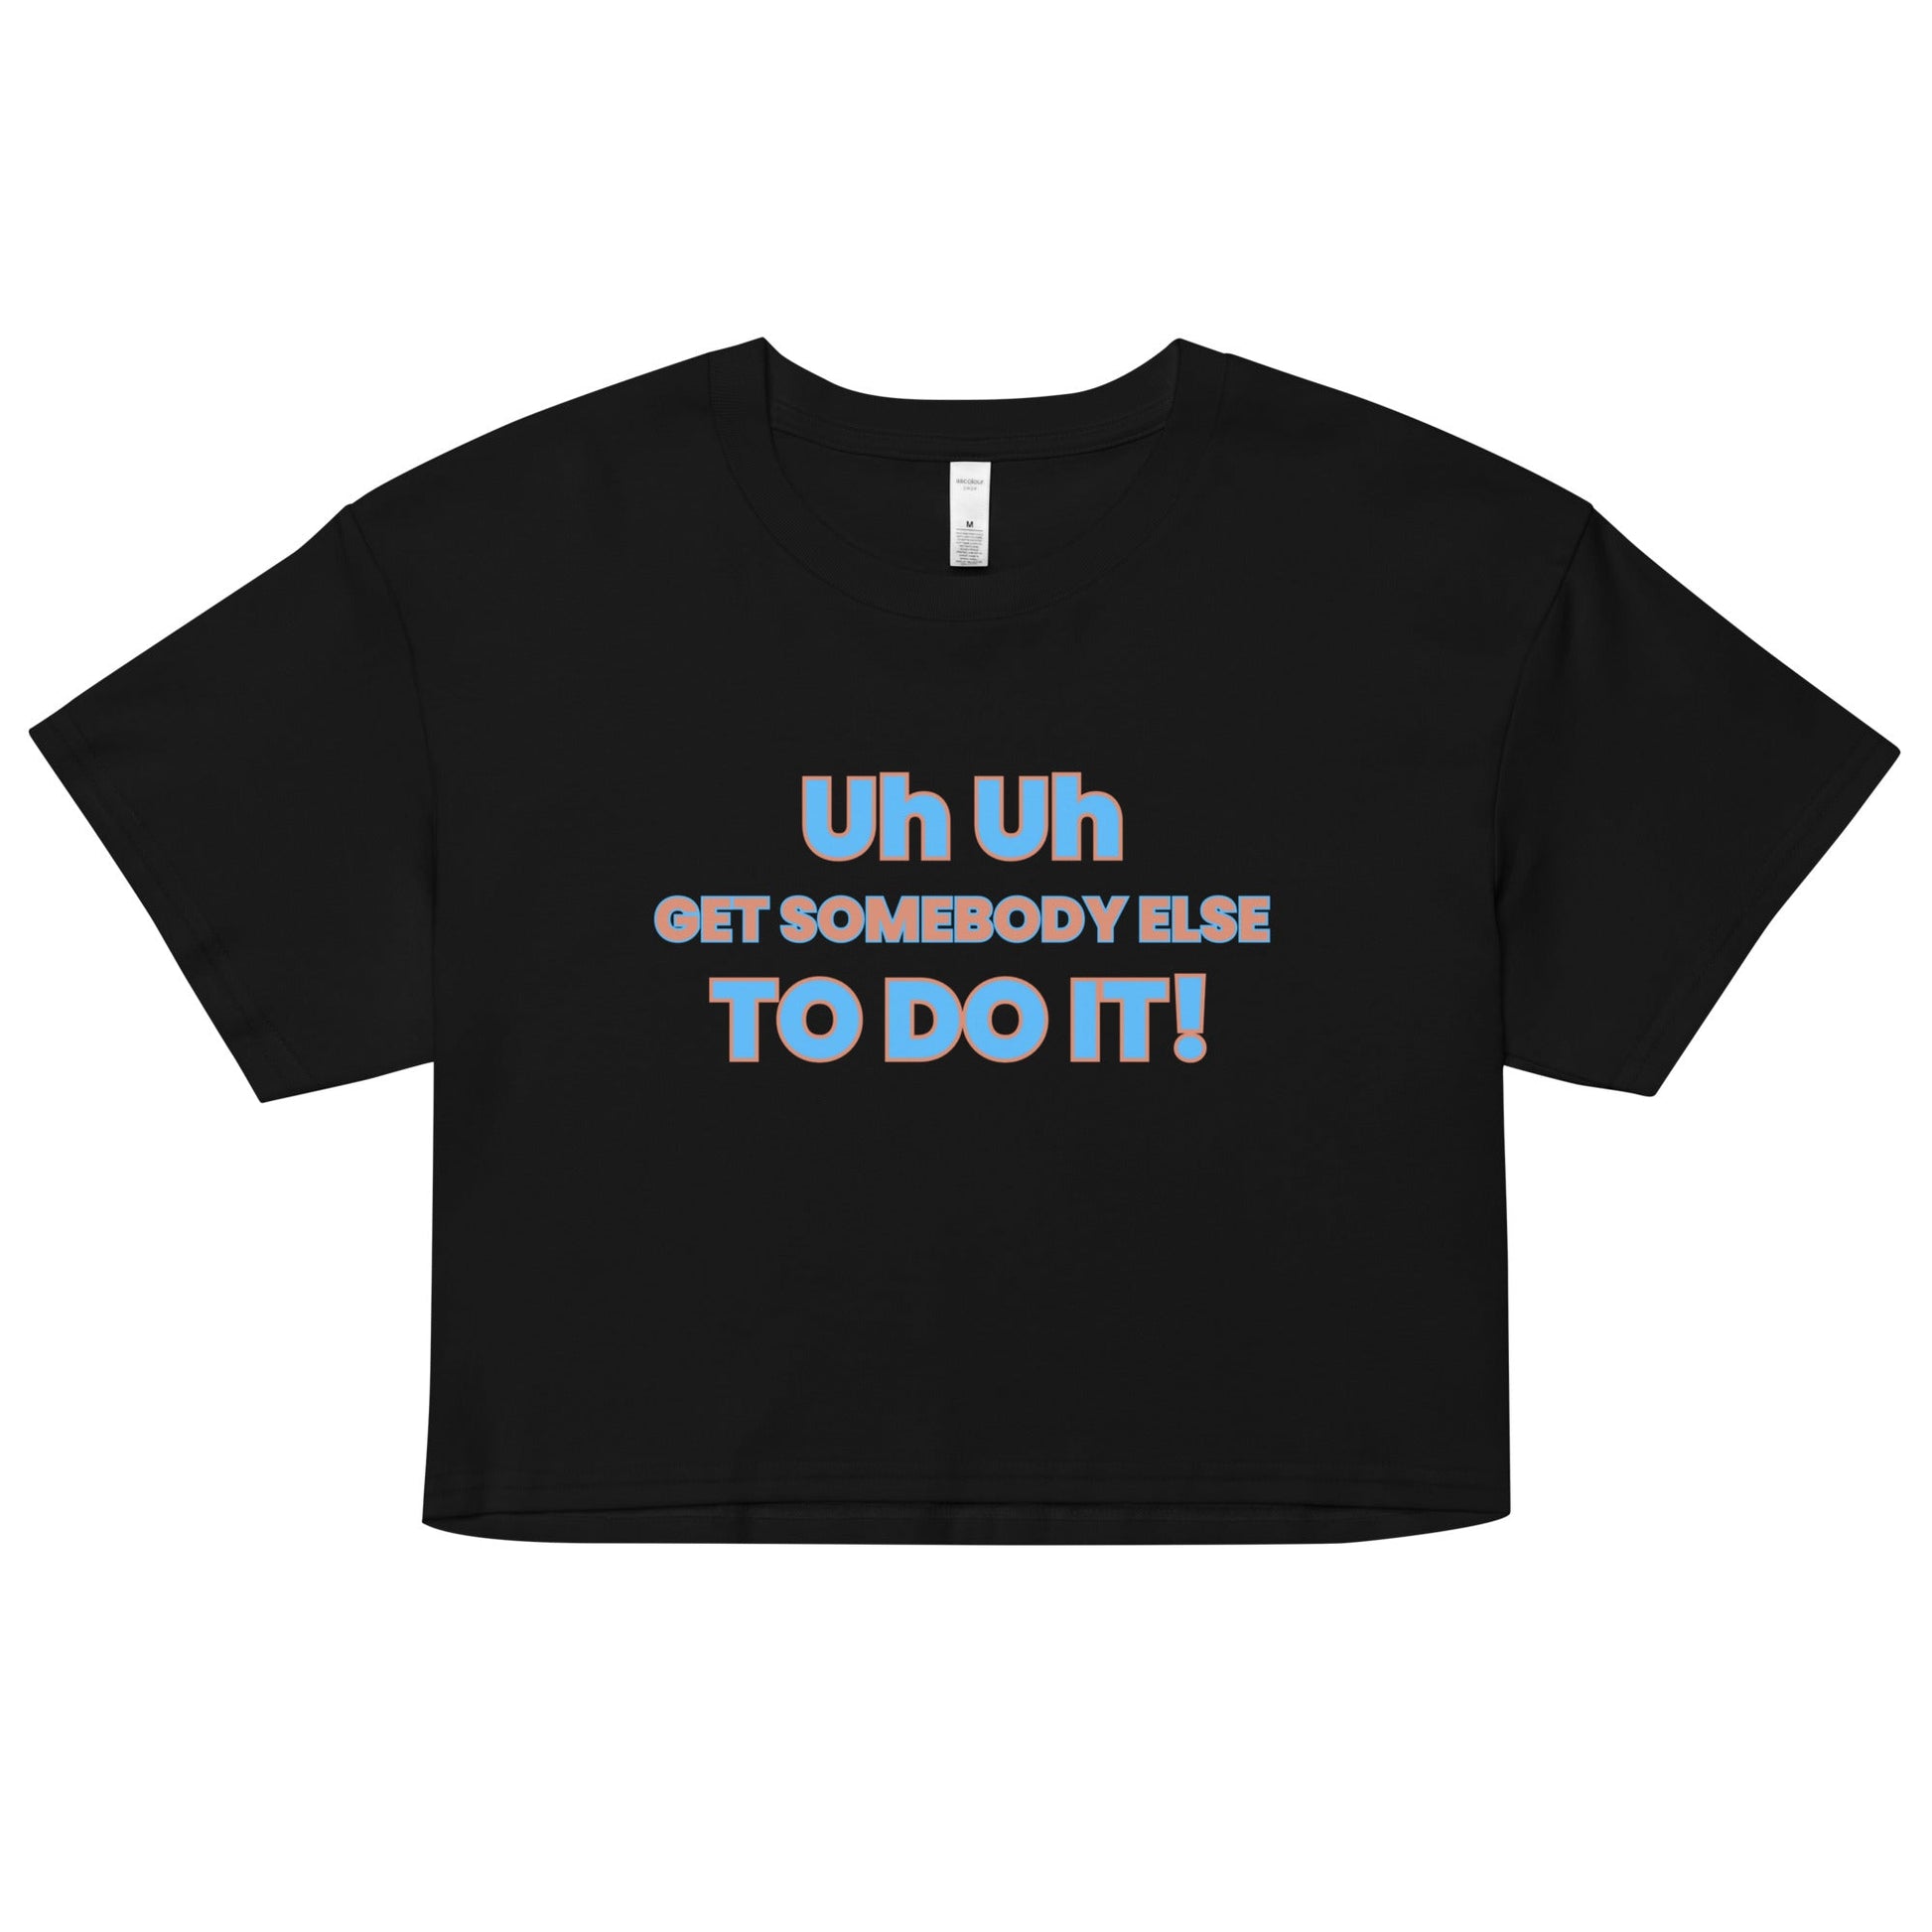 Uh Uh Get Somebody Else To Do It! Women’s crop top - Catch This Tea Shirts